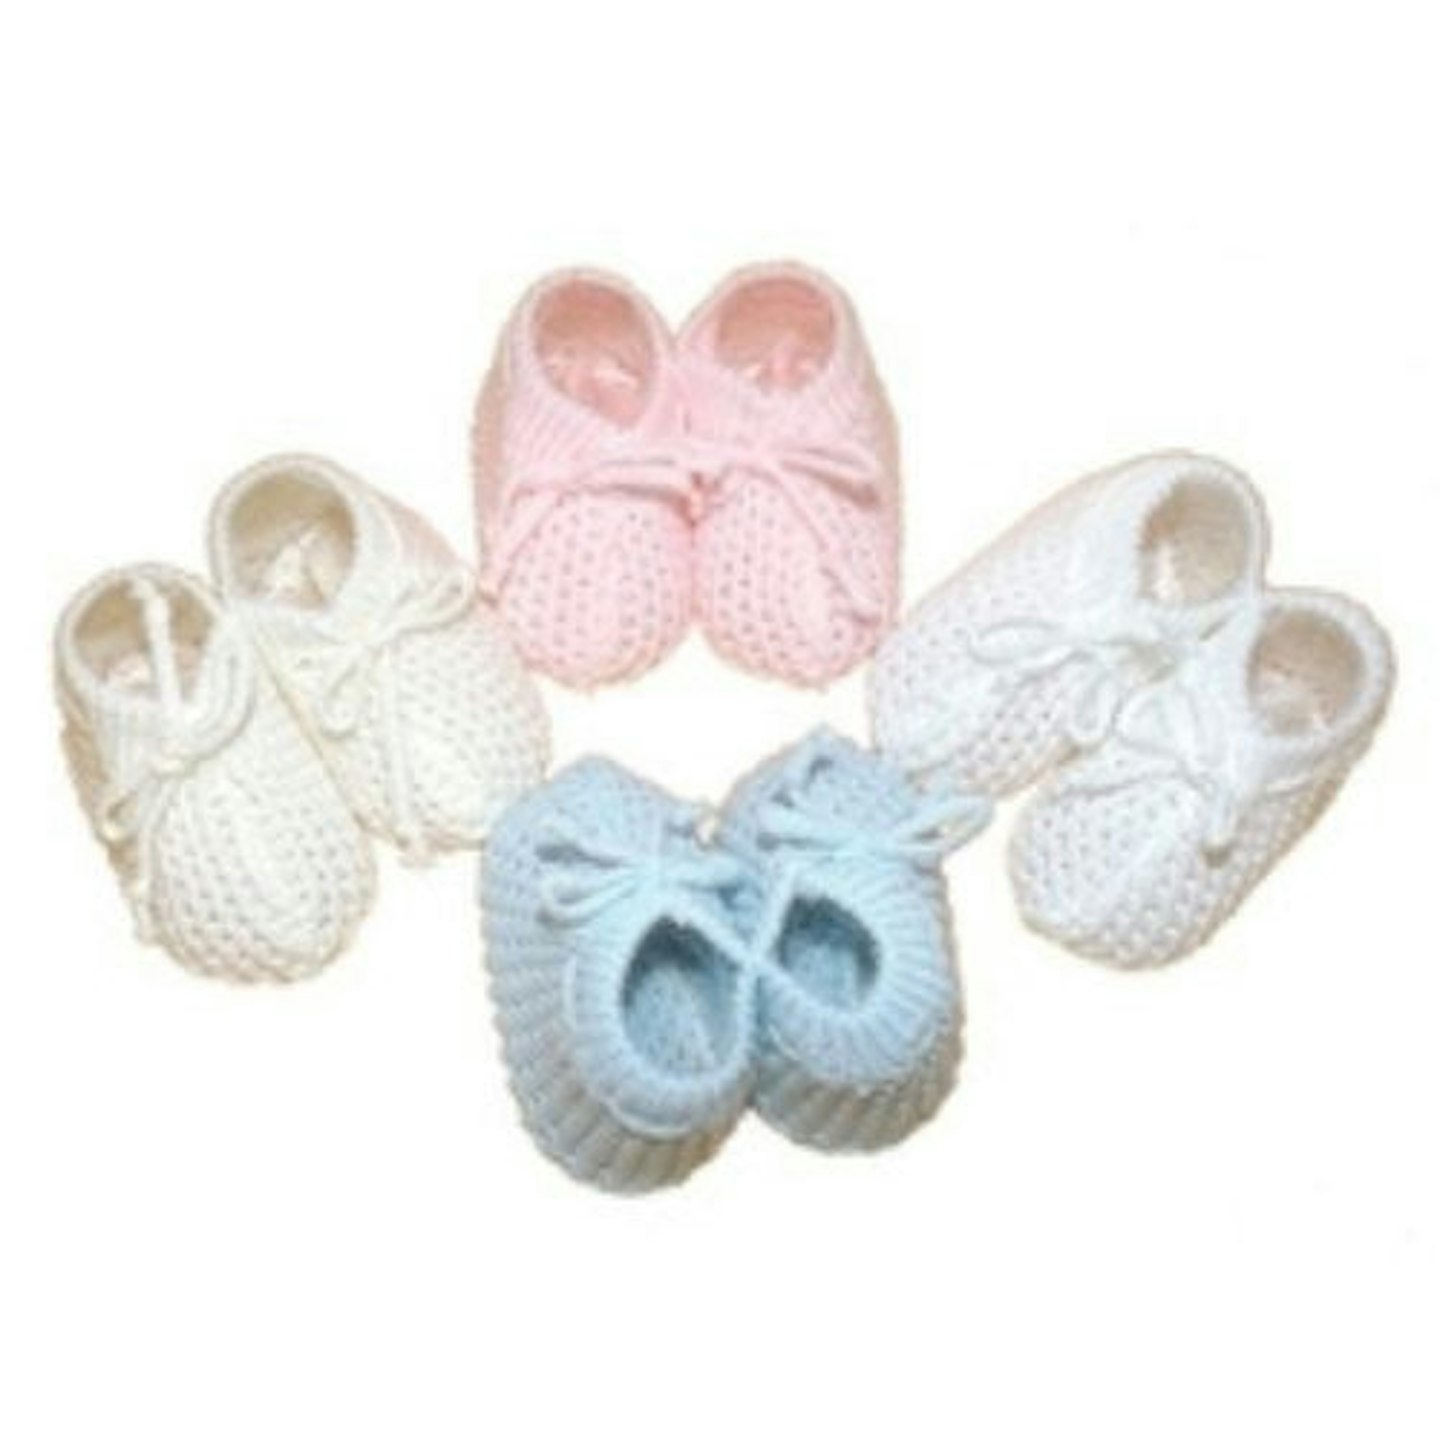 Soft baby shoes premature sizes knitted baby booties WHITE TIES 3-5lb